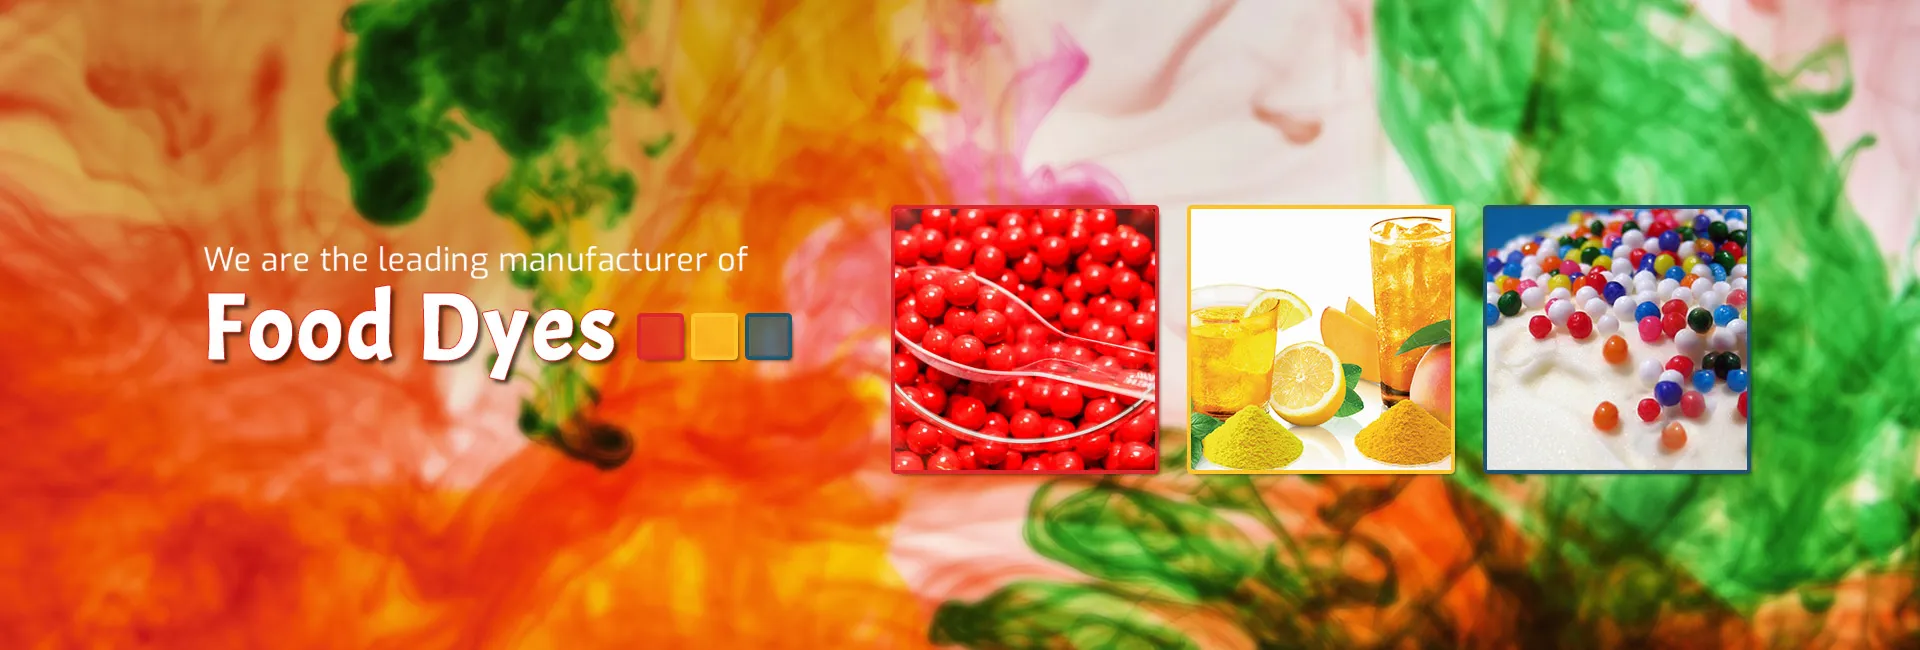 Food Dyes Manufacturer & Suppliers in Italy